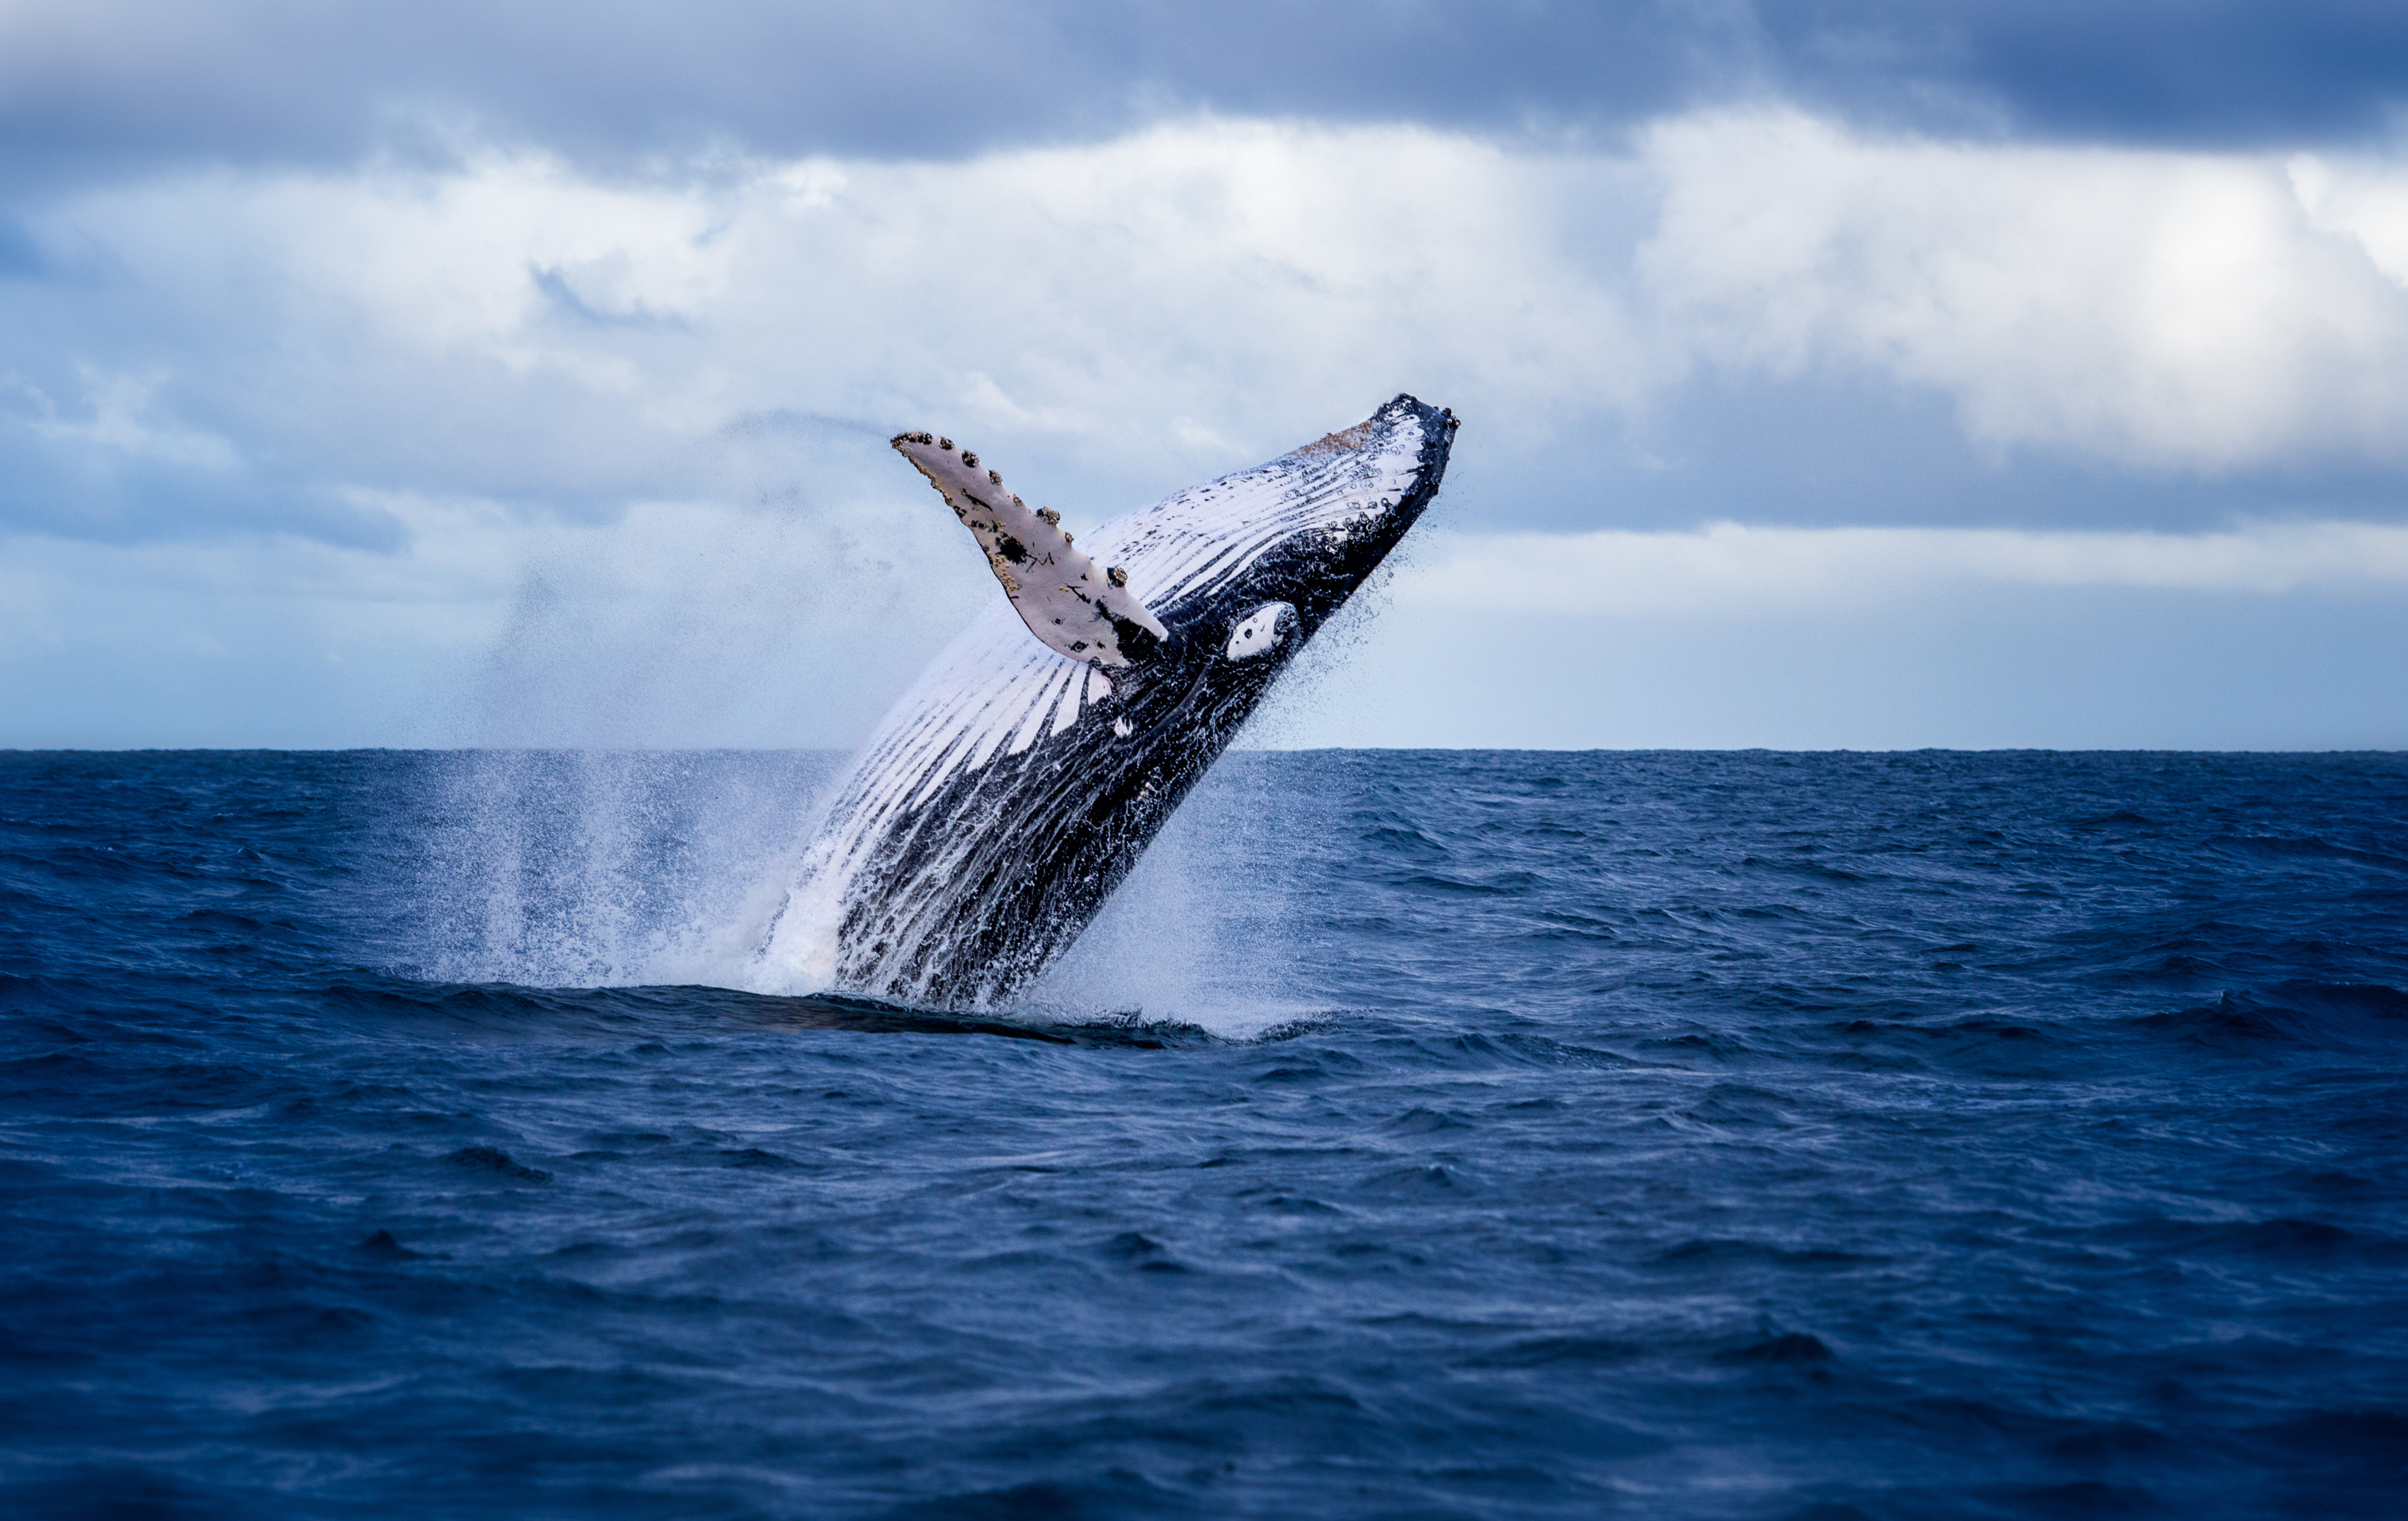 Australia’s extensive coastline hosts 10 large and 20 smaller species of whales. Photo: Shutterstock